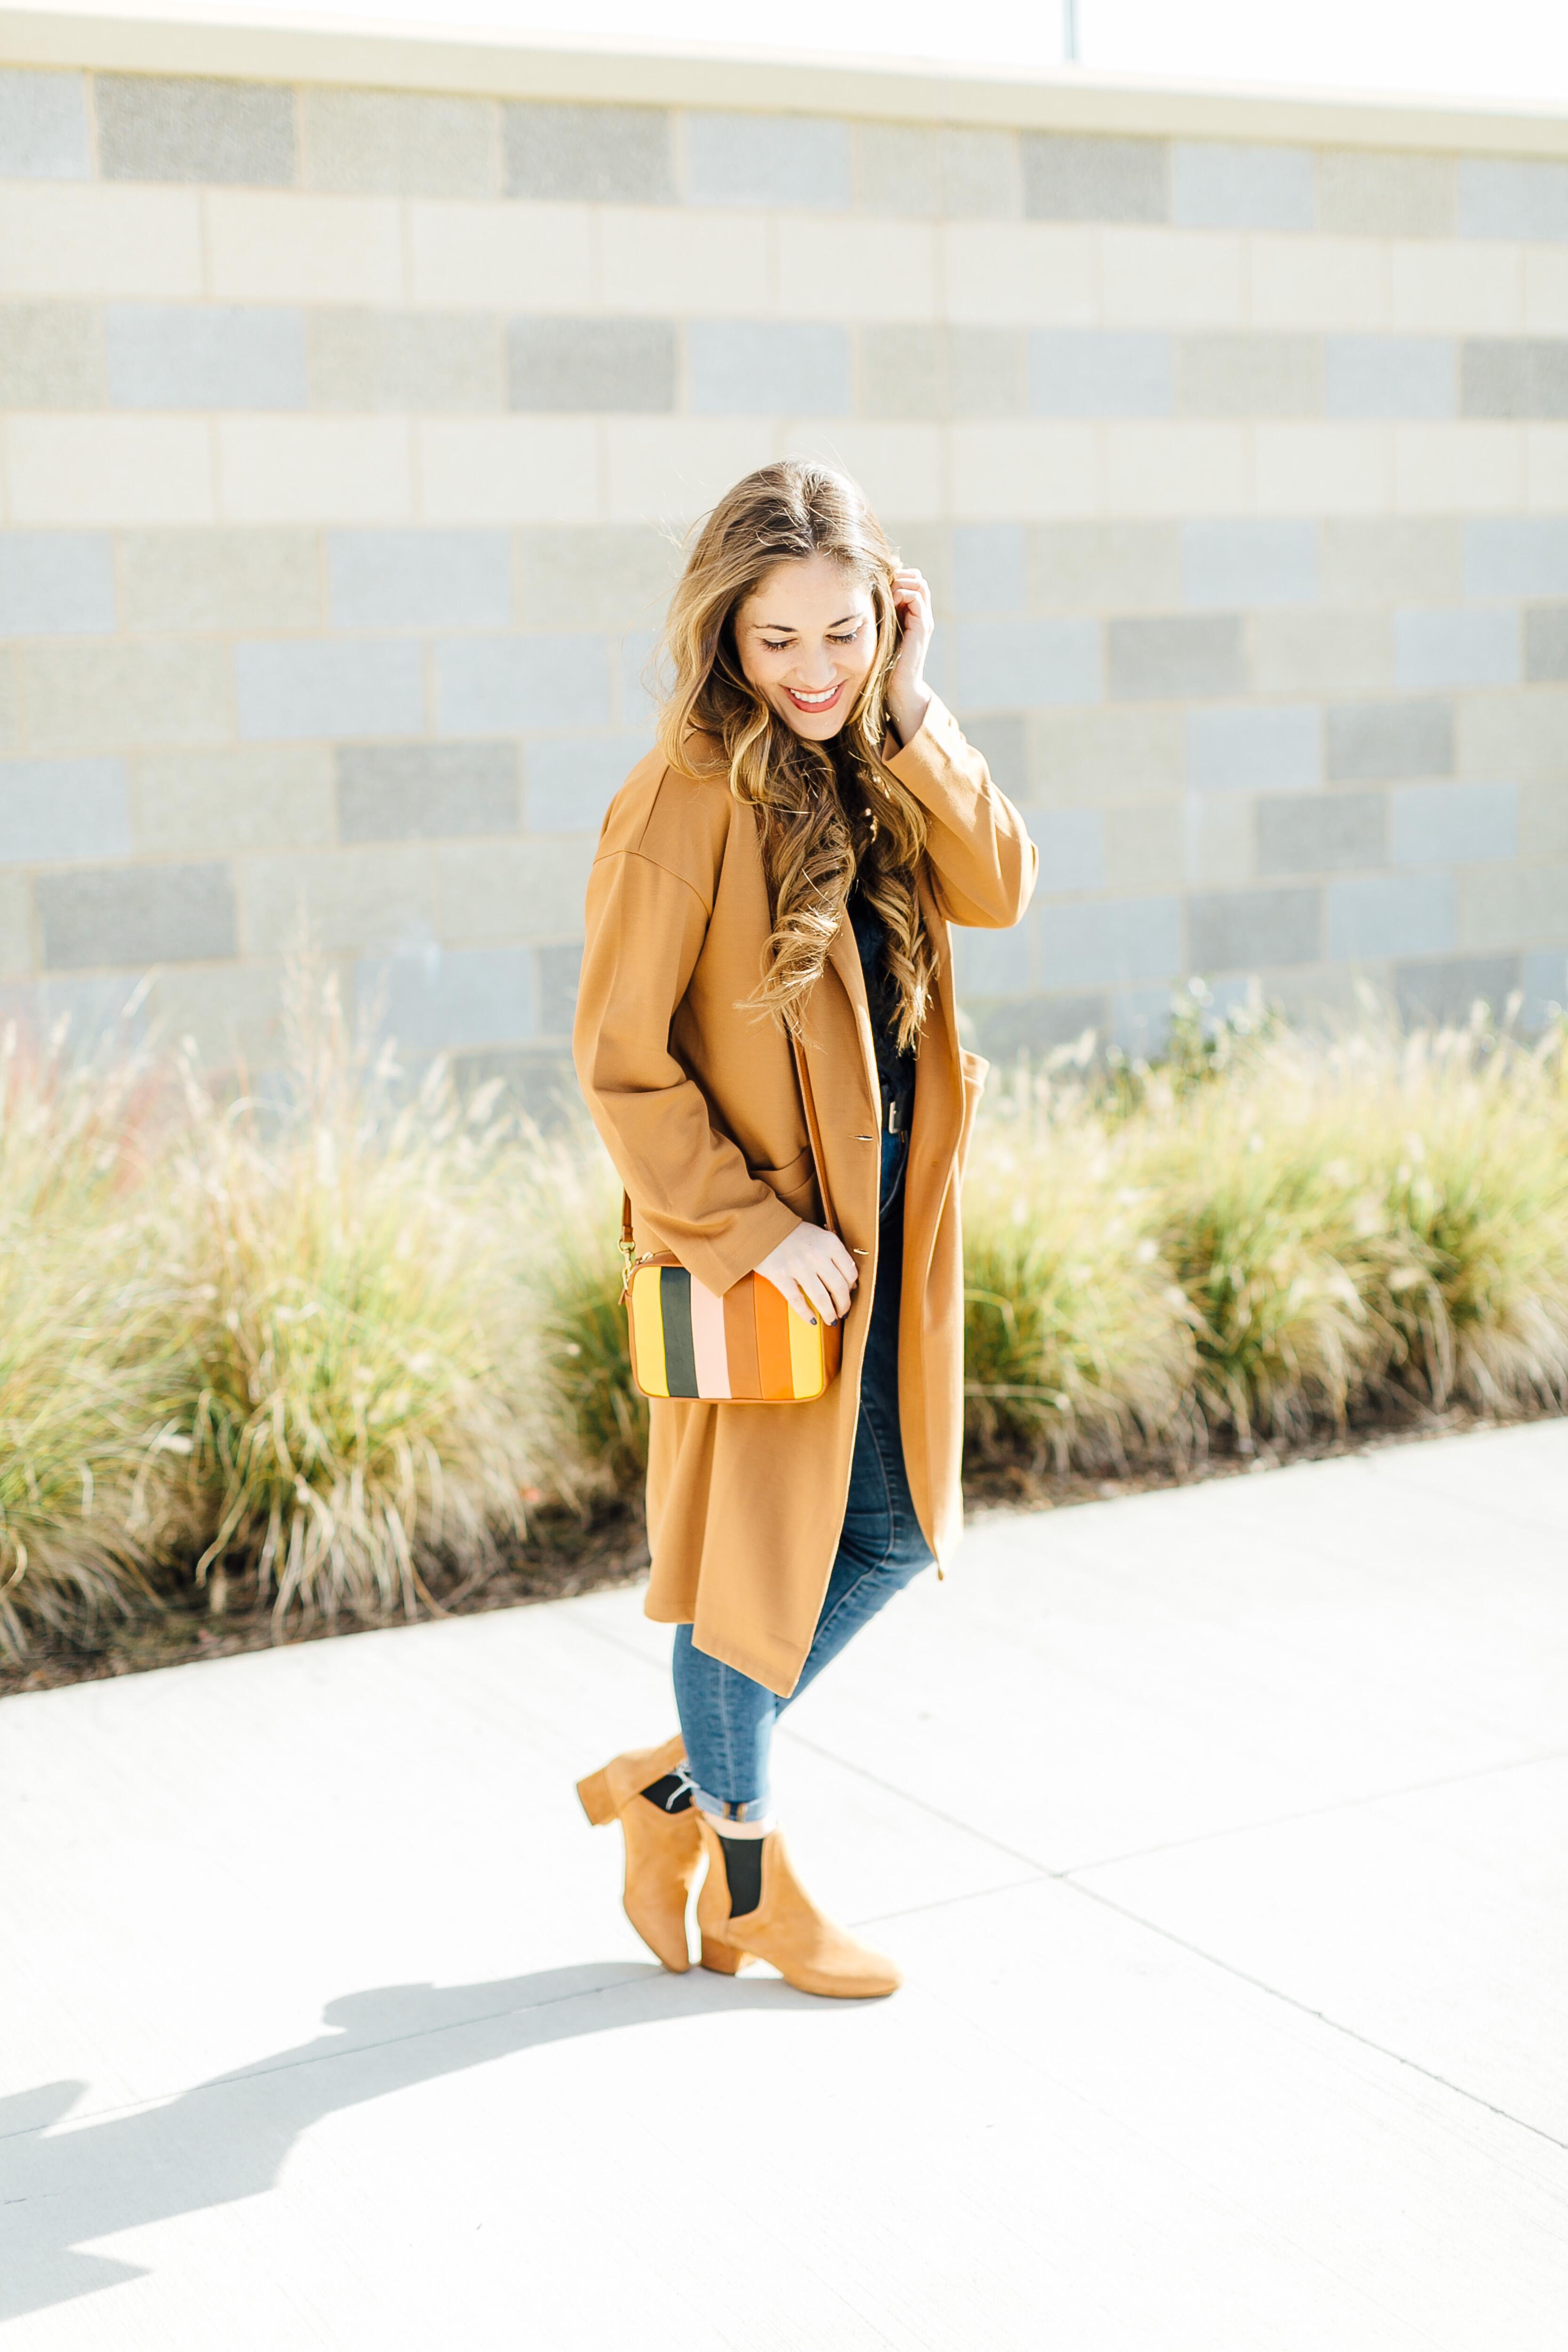 How to Wear a Longline Coat by East Memphis style blogger Walking in Memphis in High Heels